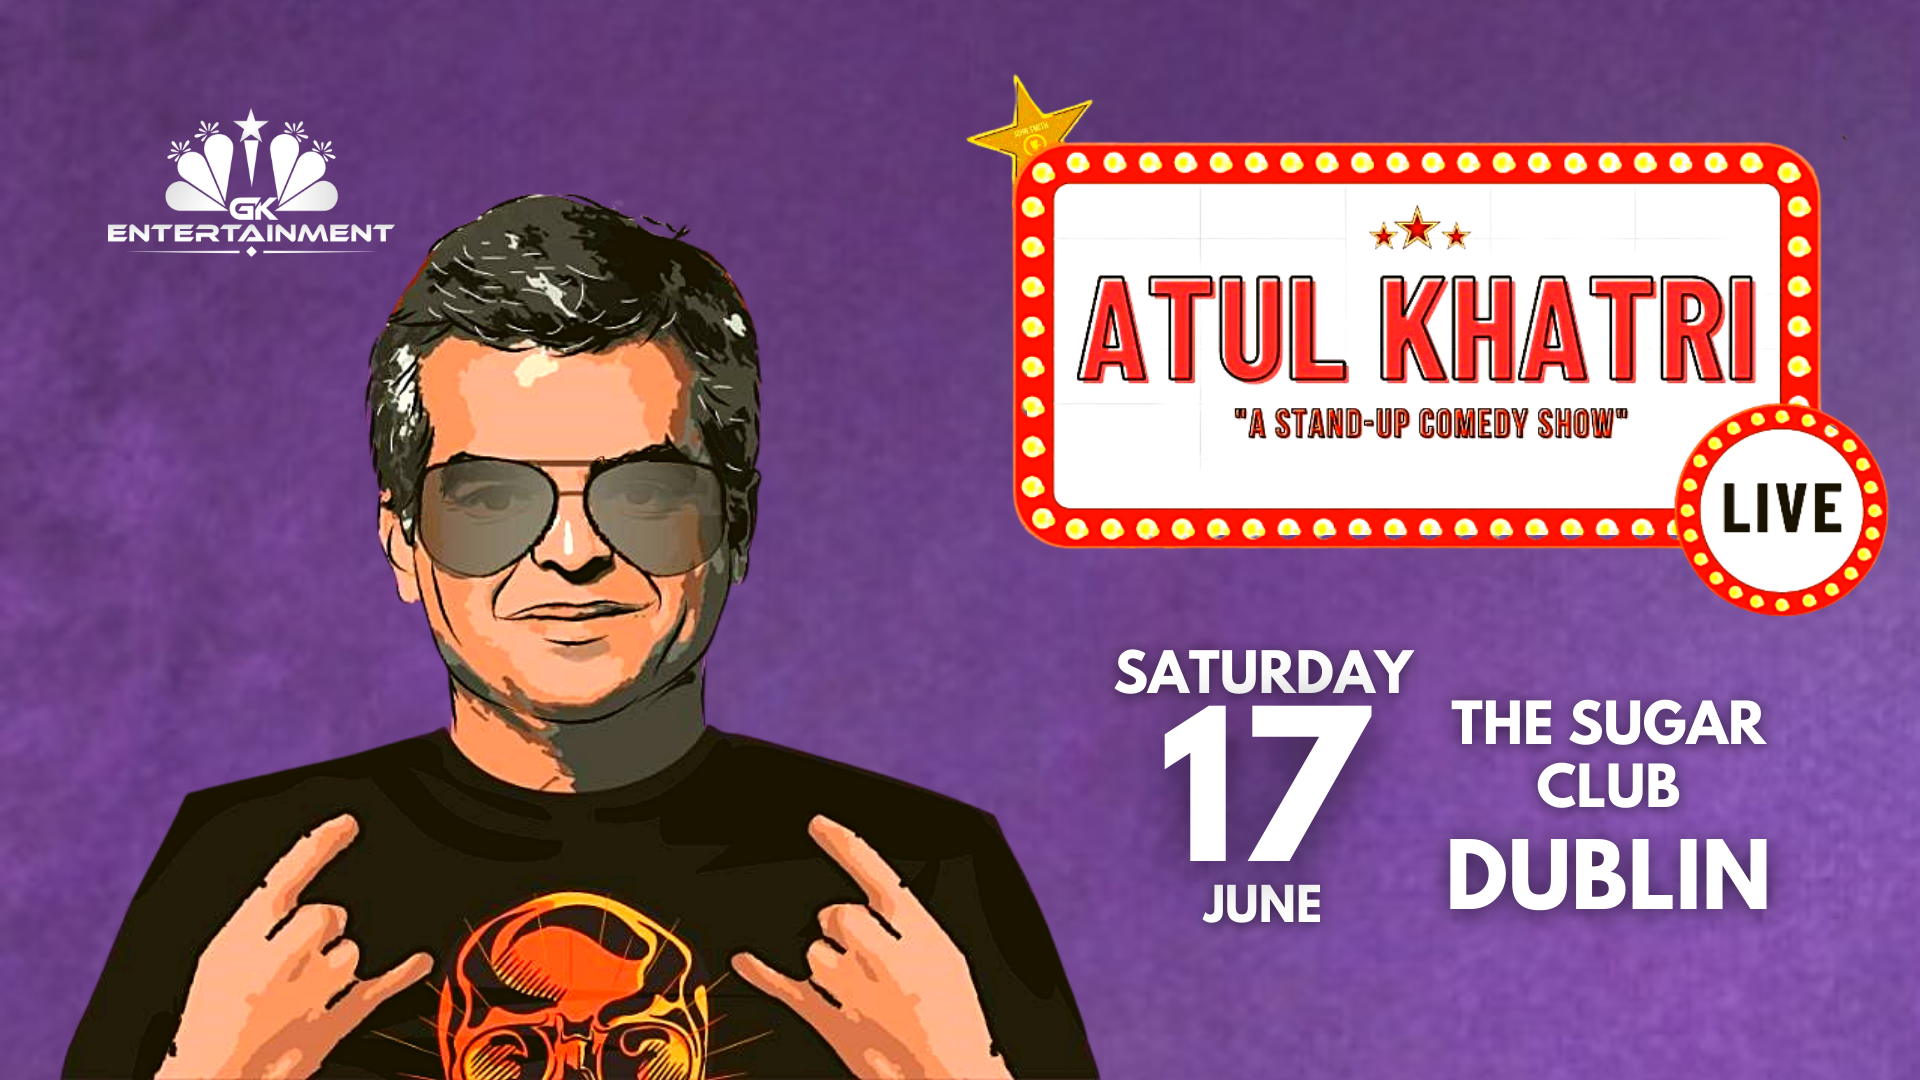 Poster for Atul Khatri Live in Dublin, featuring the comedian's photo and details about the show